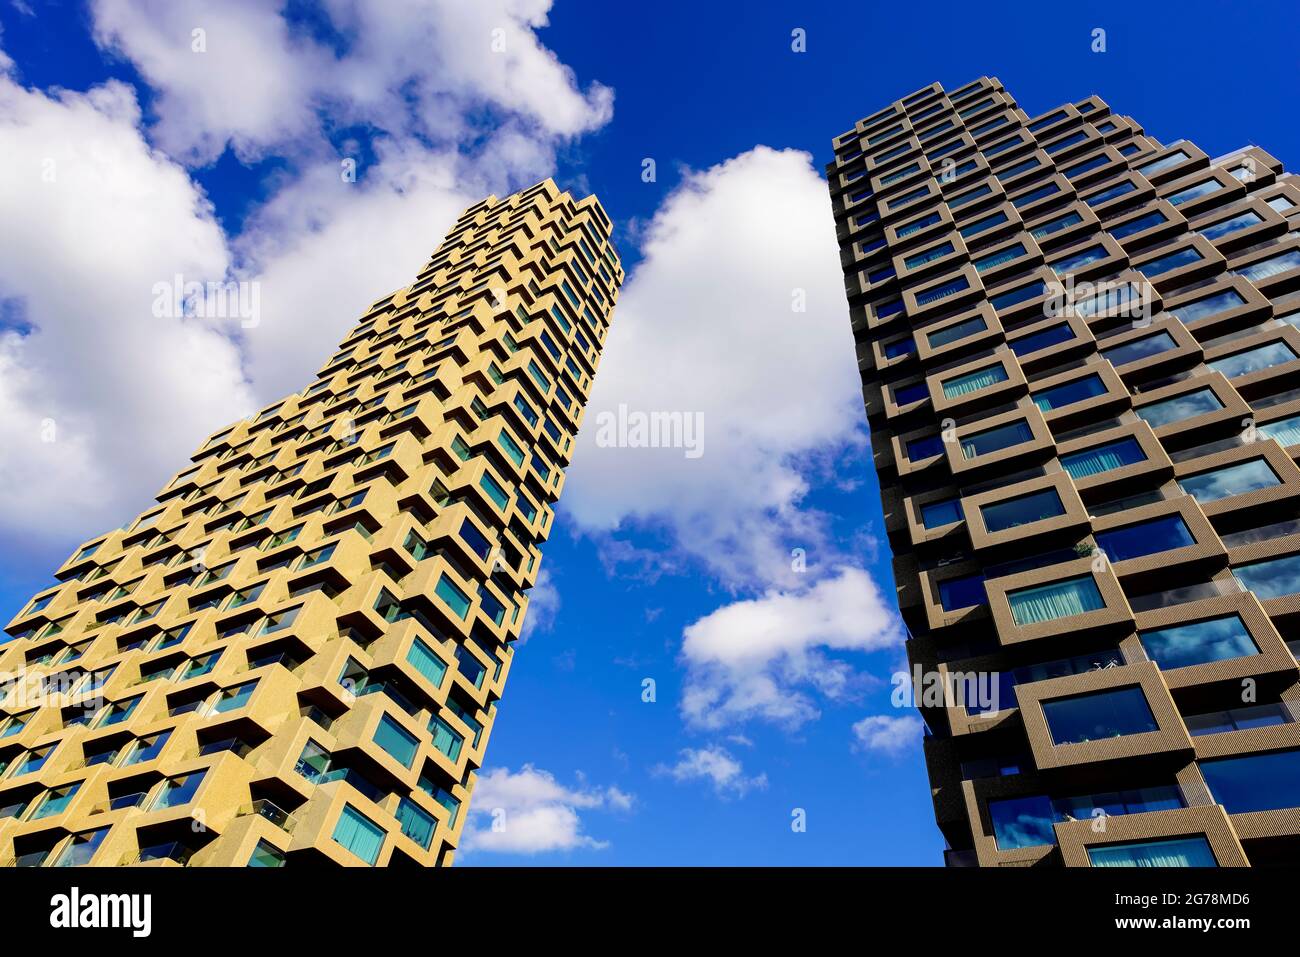 The Northern Towers (Norra tornen) are two skyscrapers in the Helix and Innovation neighborhoods at Torsplan in the northwestern part of Vasastaden in Stock Photo